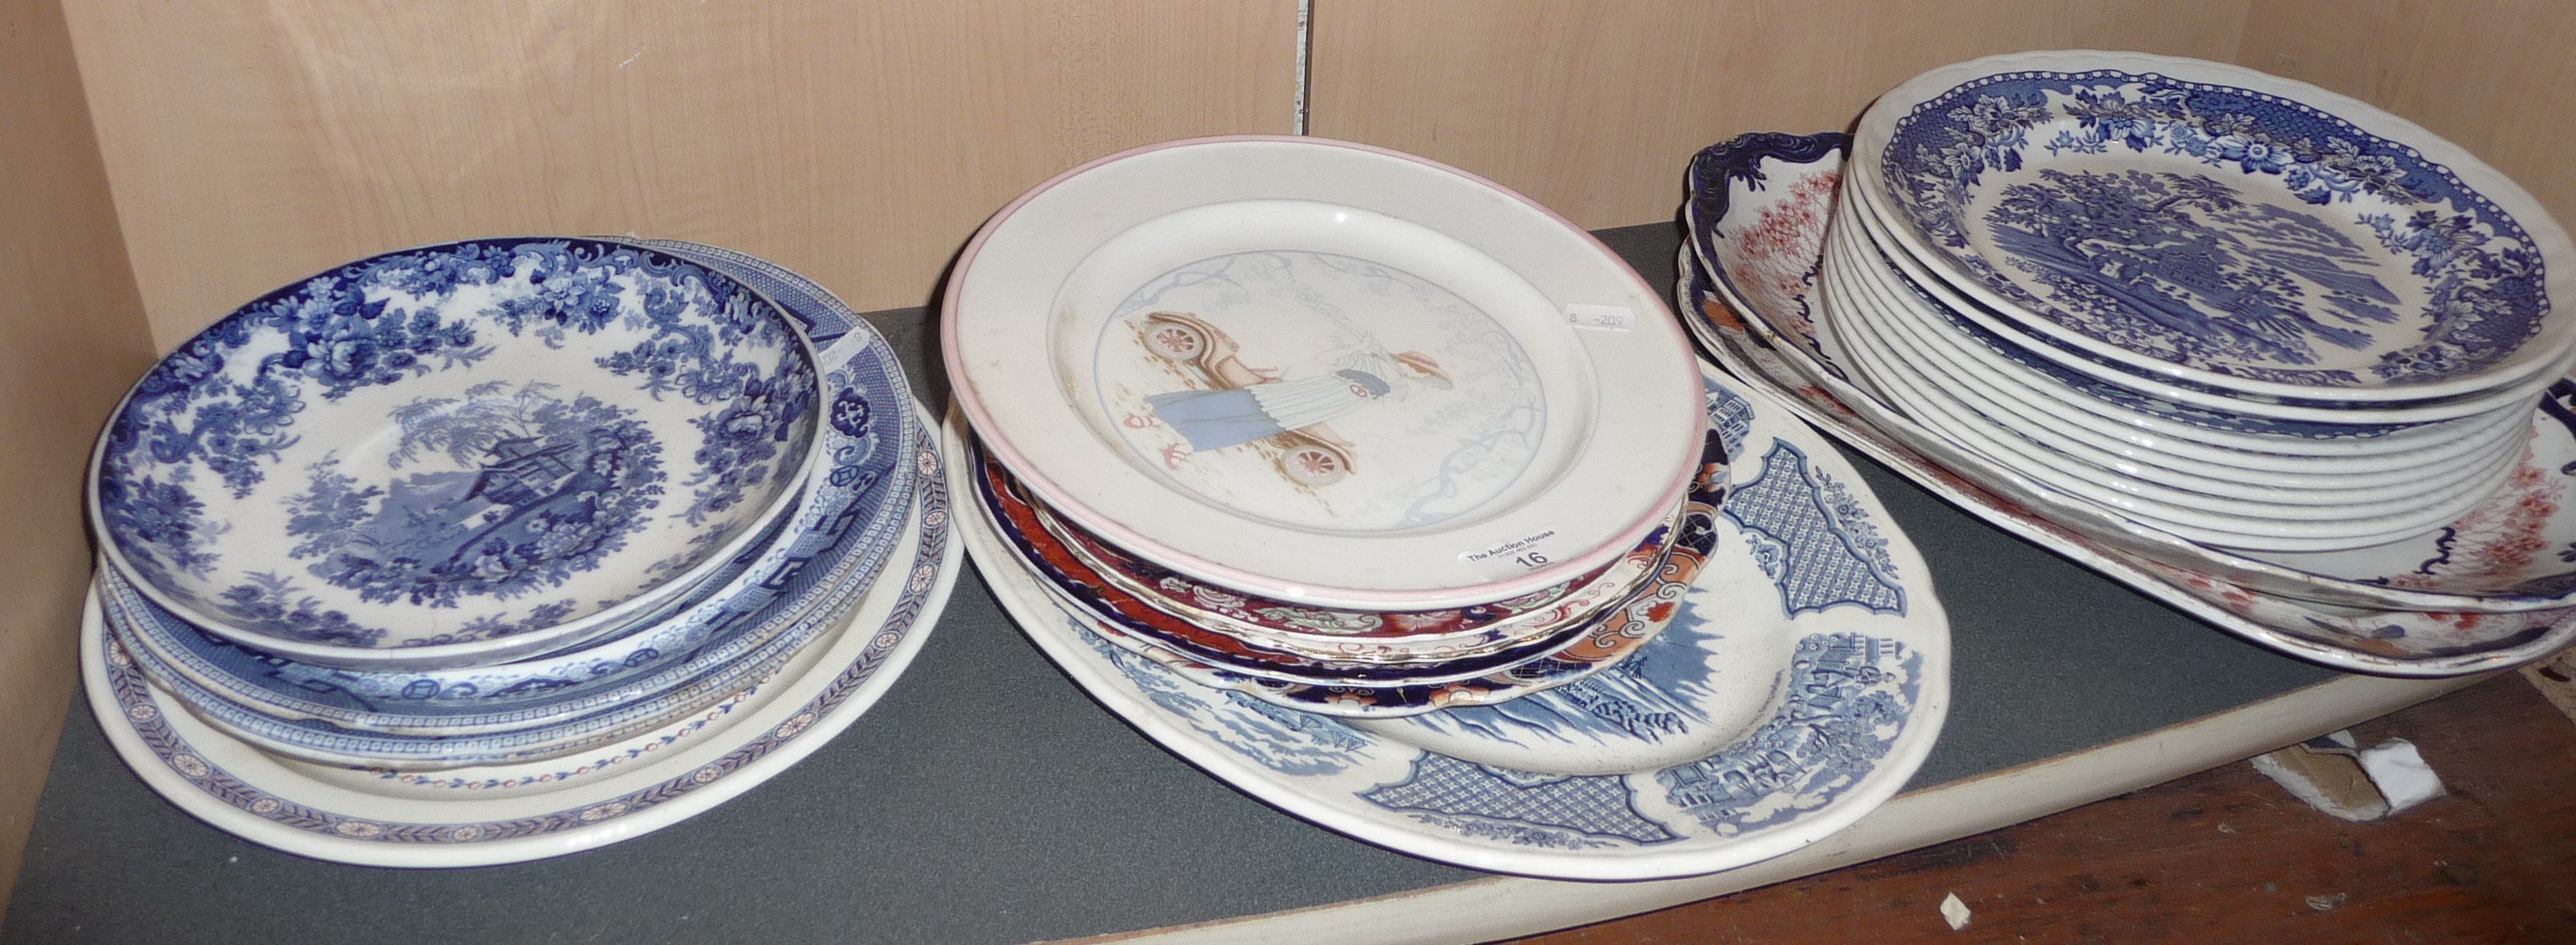 Assorted china plates